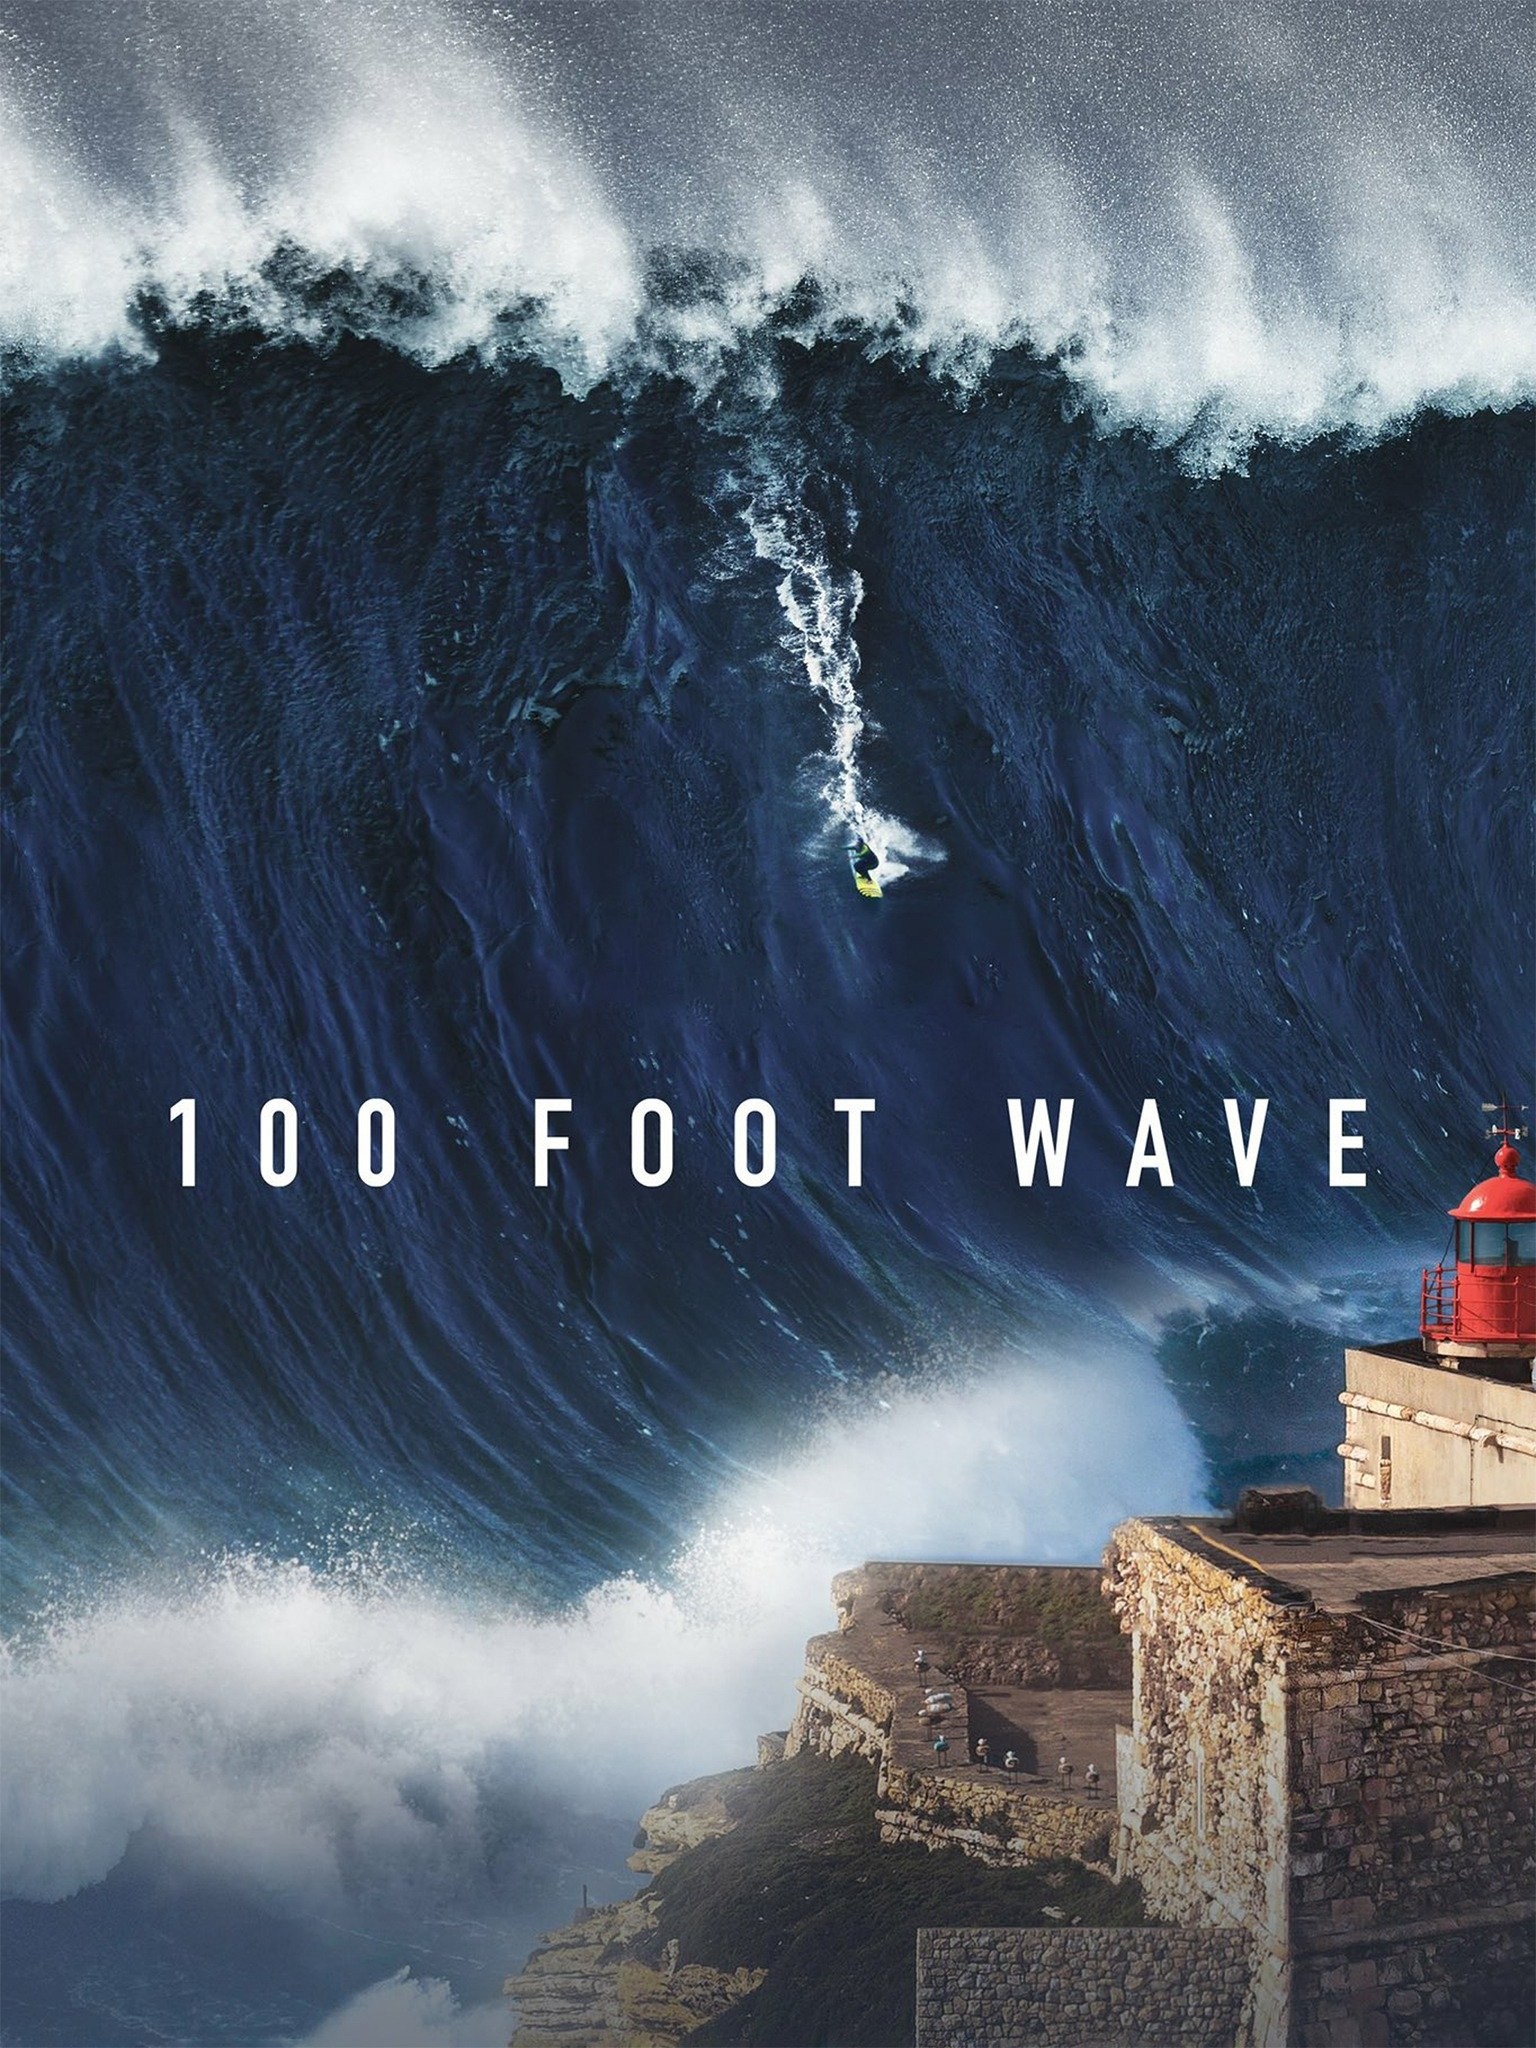 Swell: A Year of Waves (Ocean Coffee Table Book, Book About Surfing)